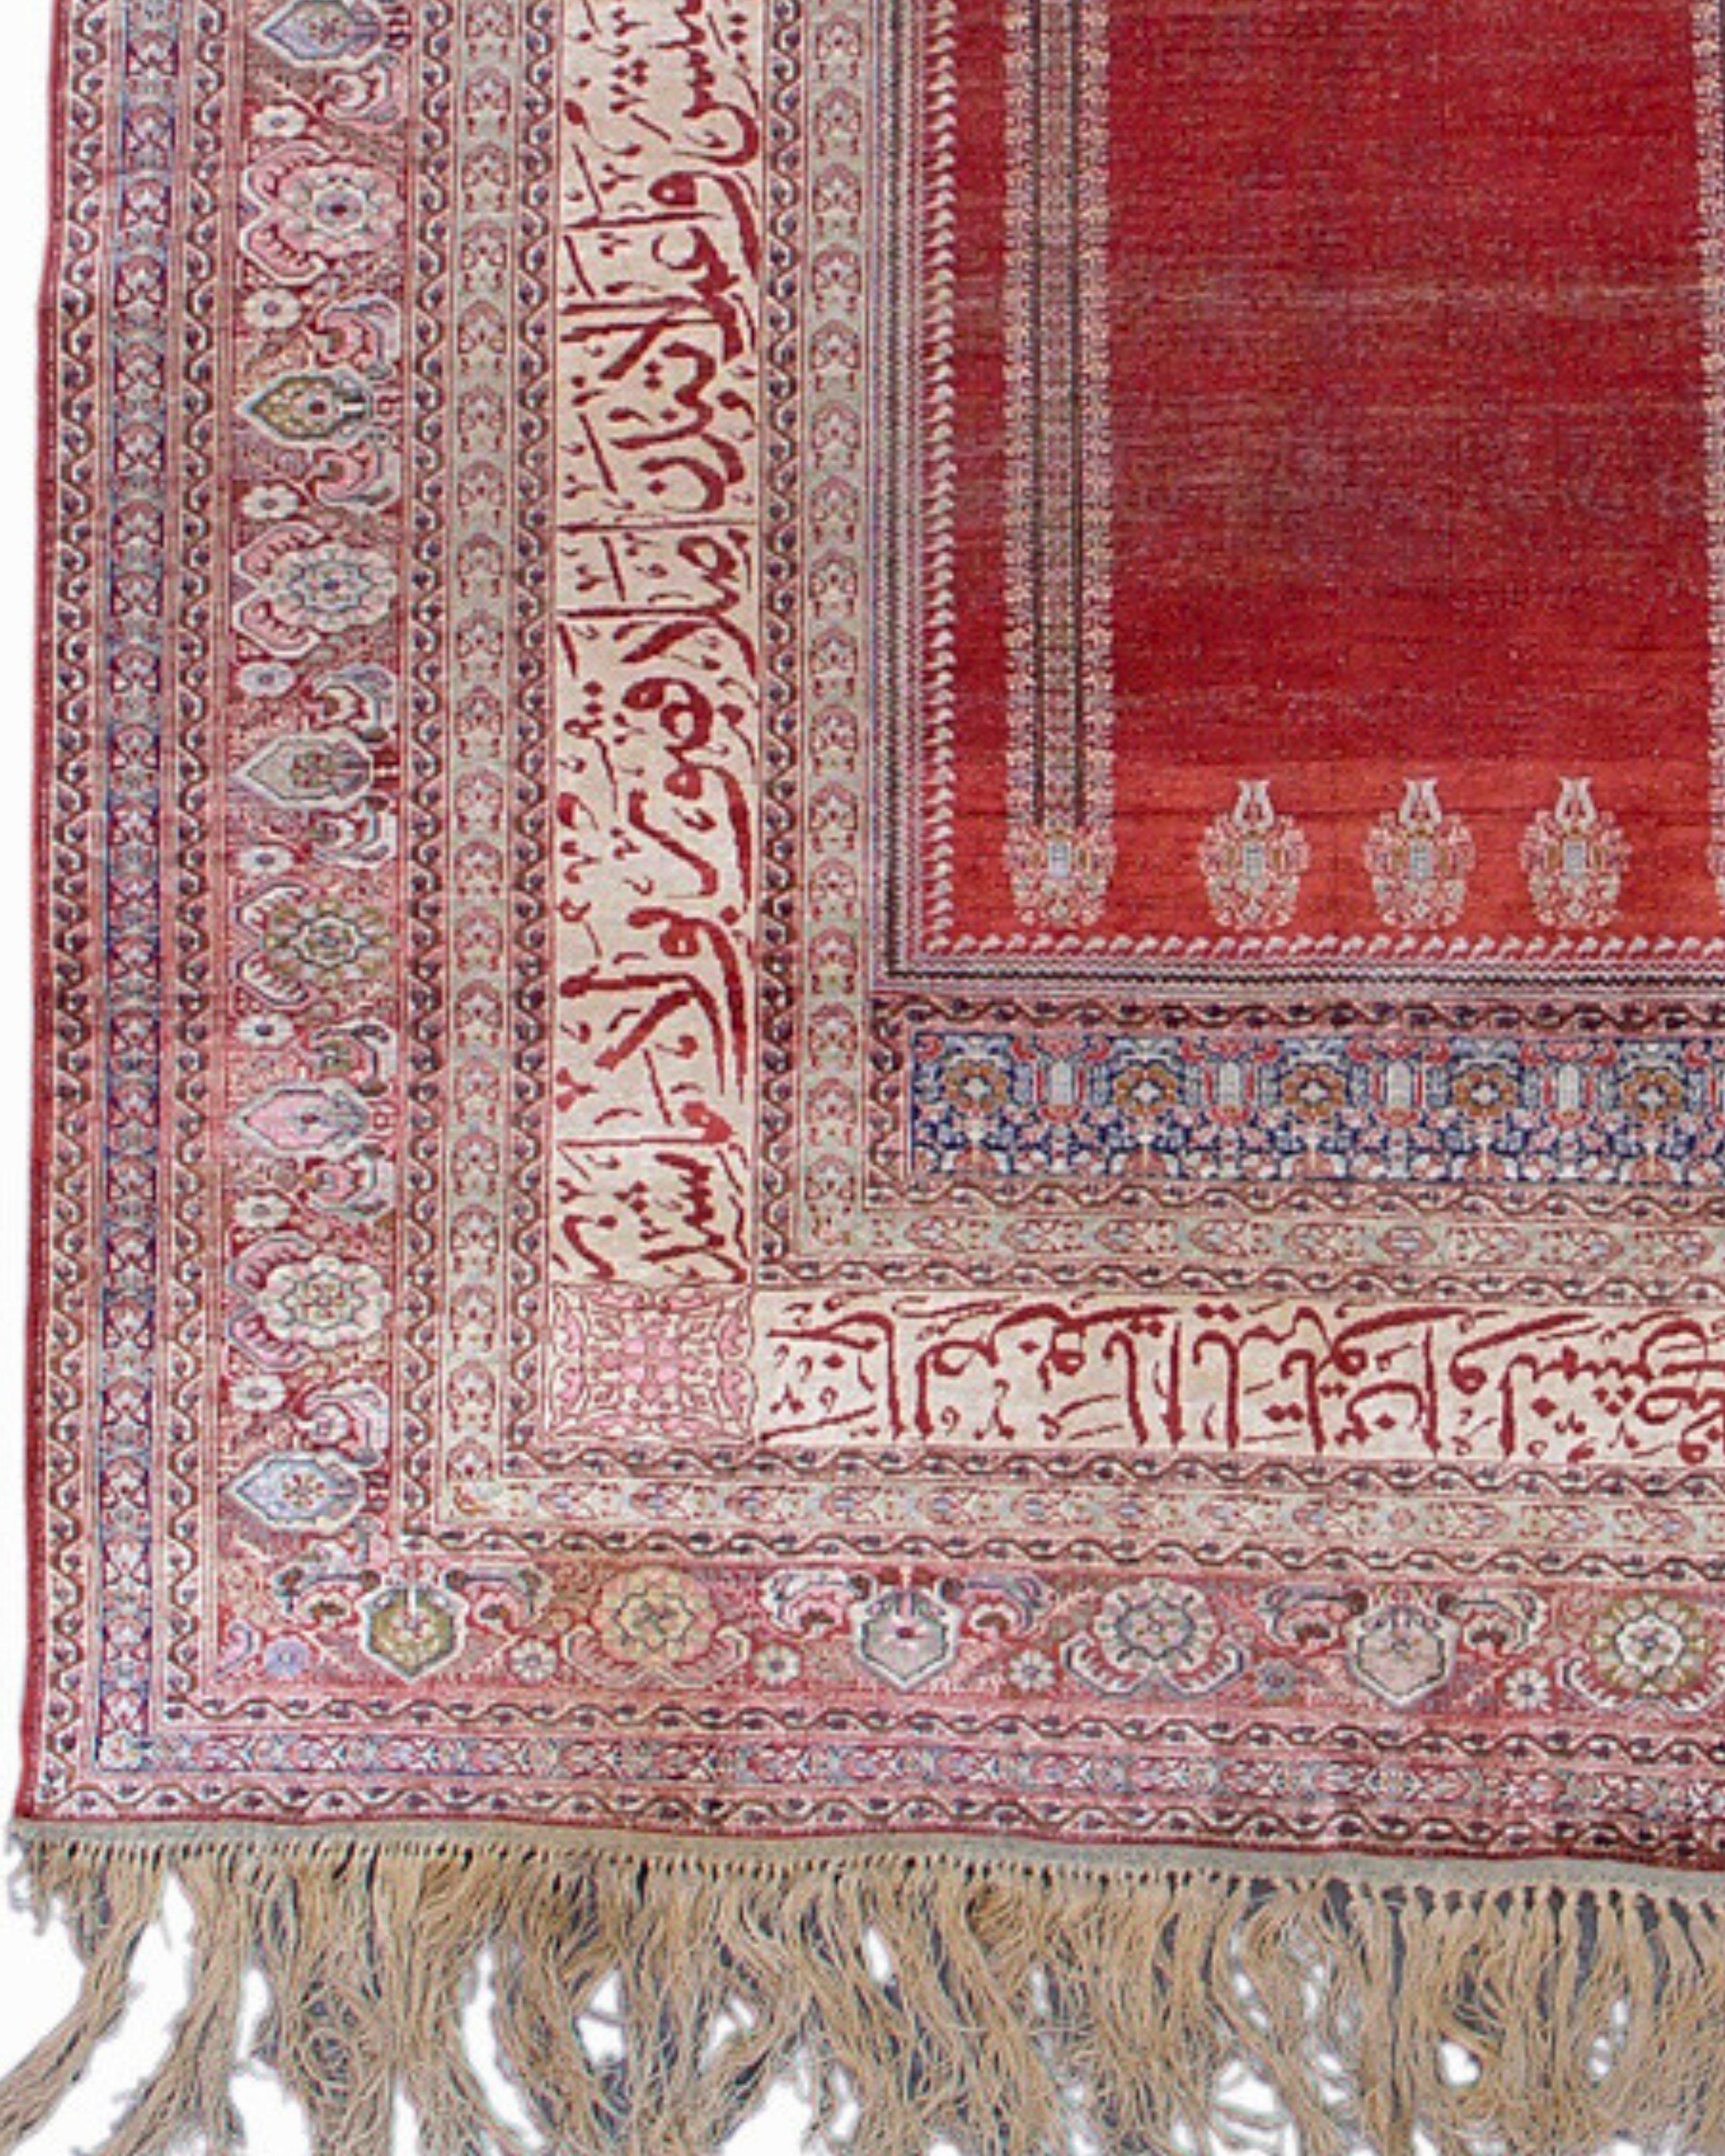 Hand-Woven Antique Anatolian Silk Sivas Rug, Early 20th Century For Sale